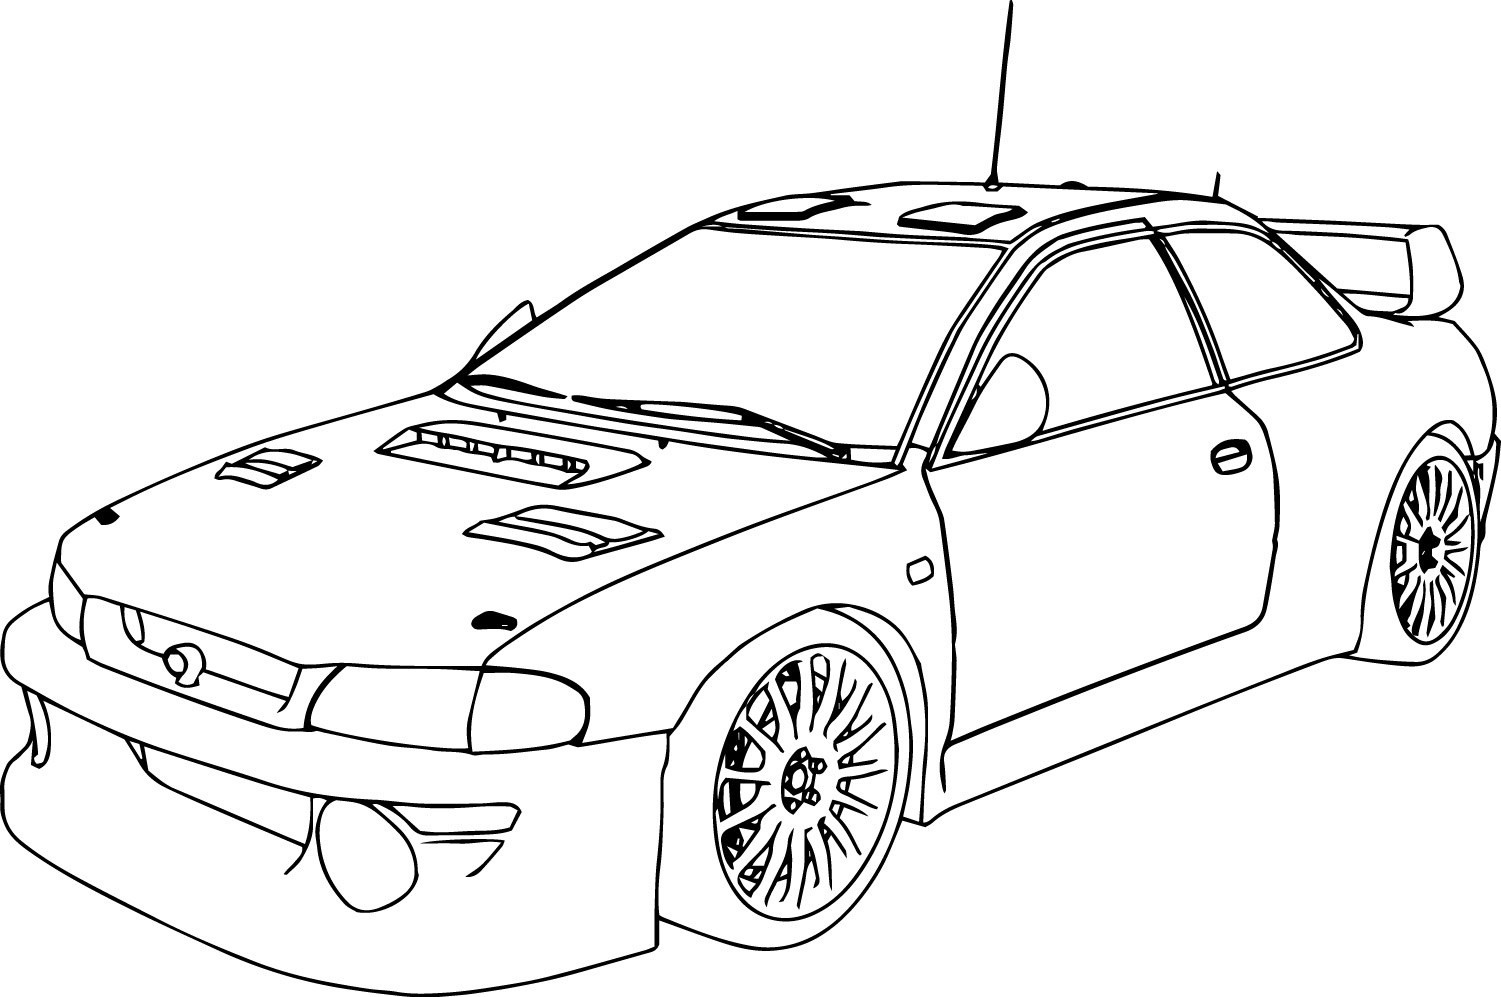 Drag Car Coloring Pages Drag Car Coloring Pages At Getdrawings Free For Personal Use